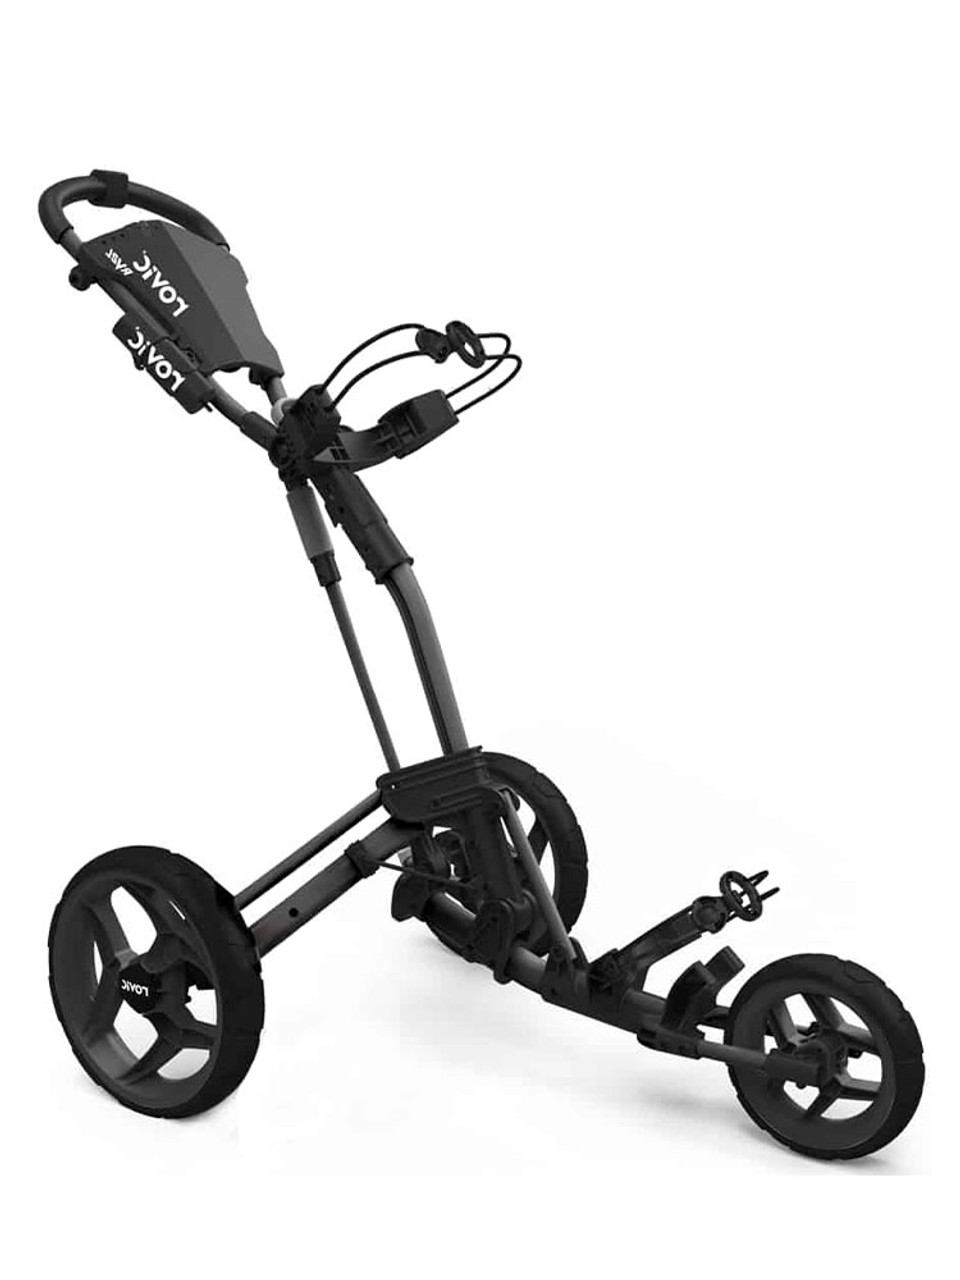 smoothy lite golf buggy